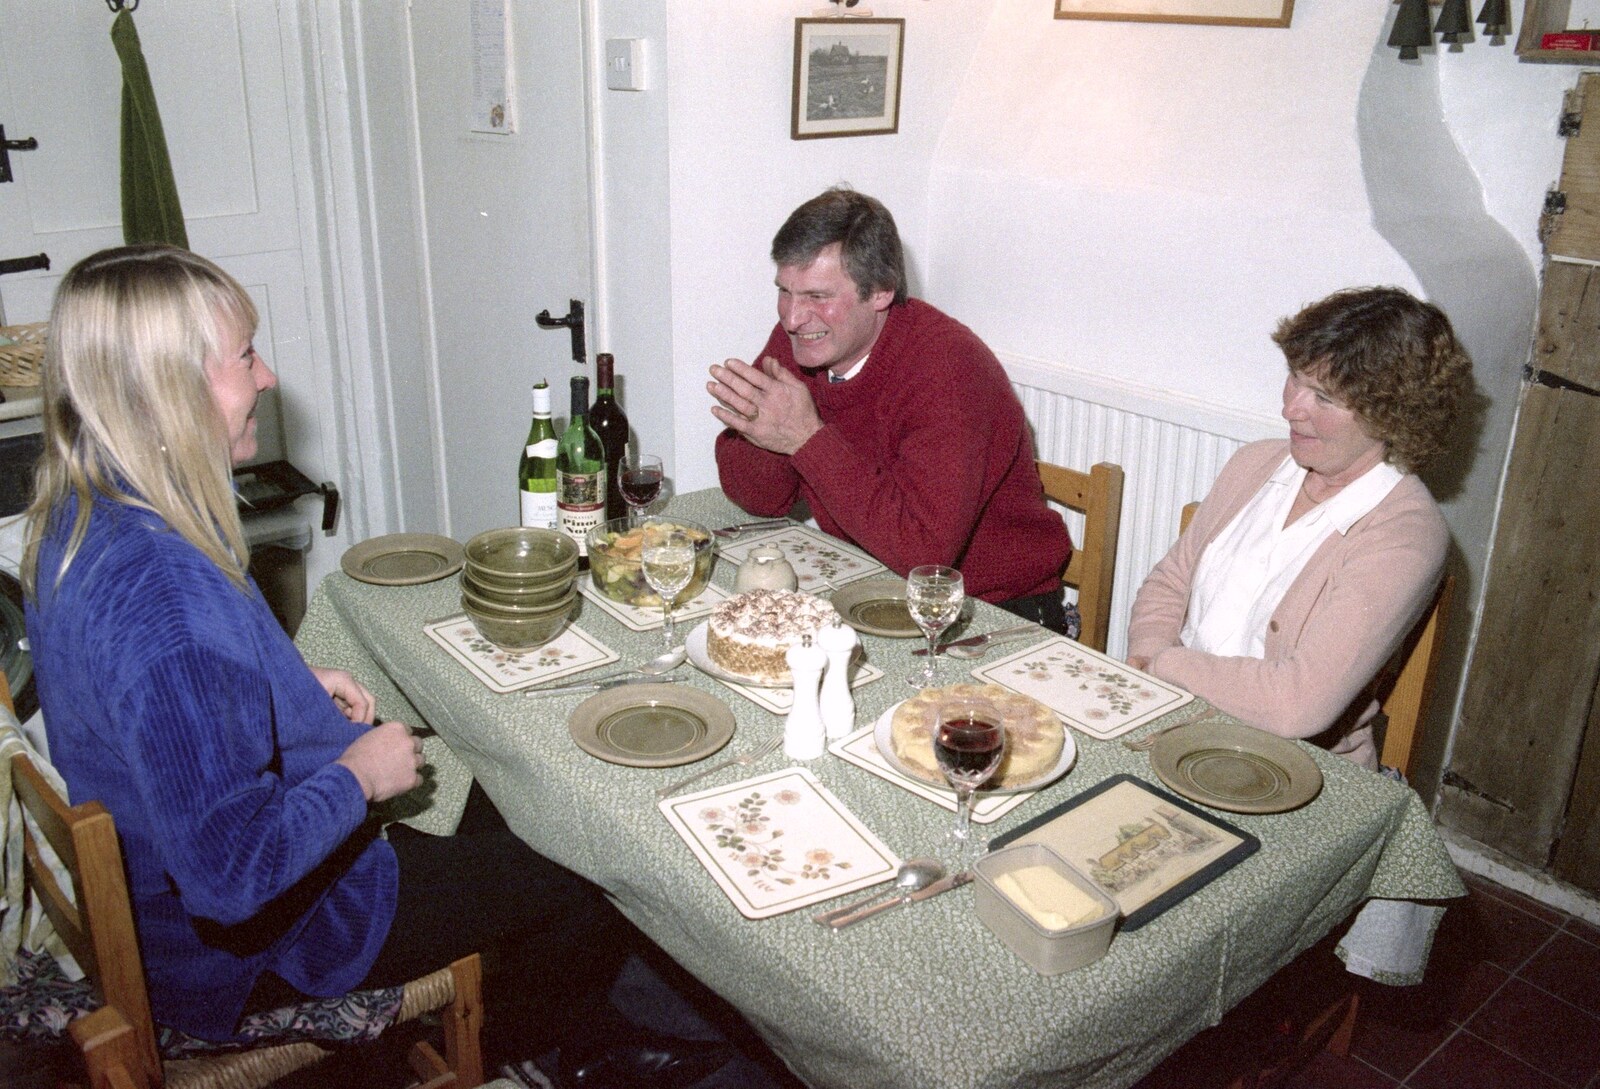 Sue, Geoff and Brenda from Lunch and Dinner at Mad Sue's, Stuston, Suffolk - 30th March 1995